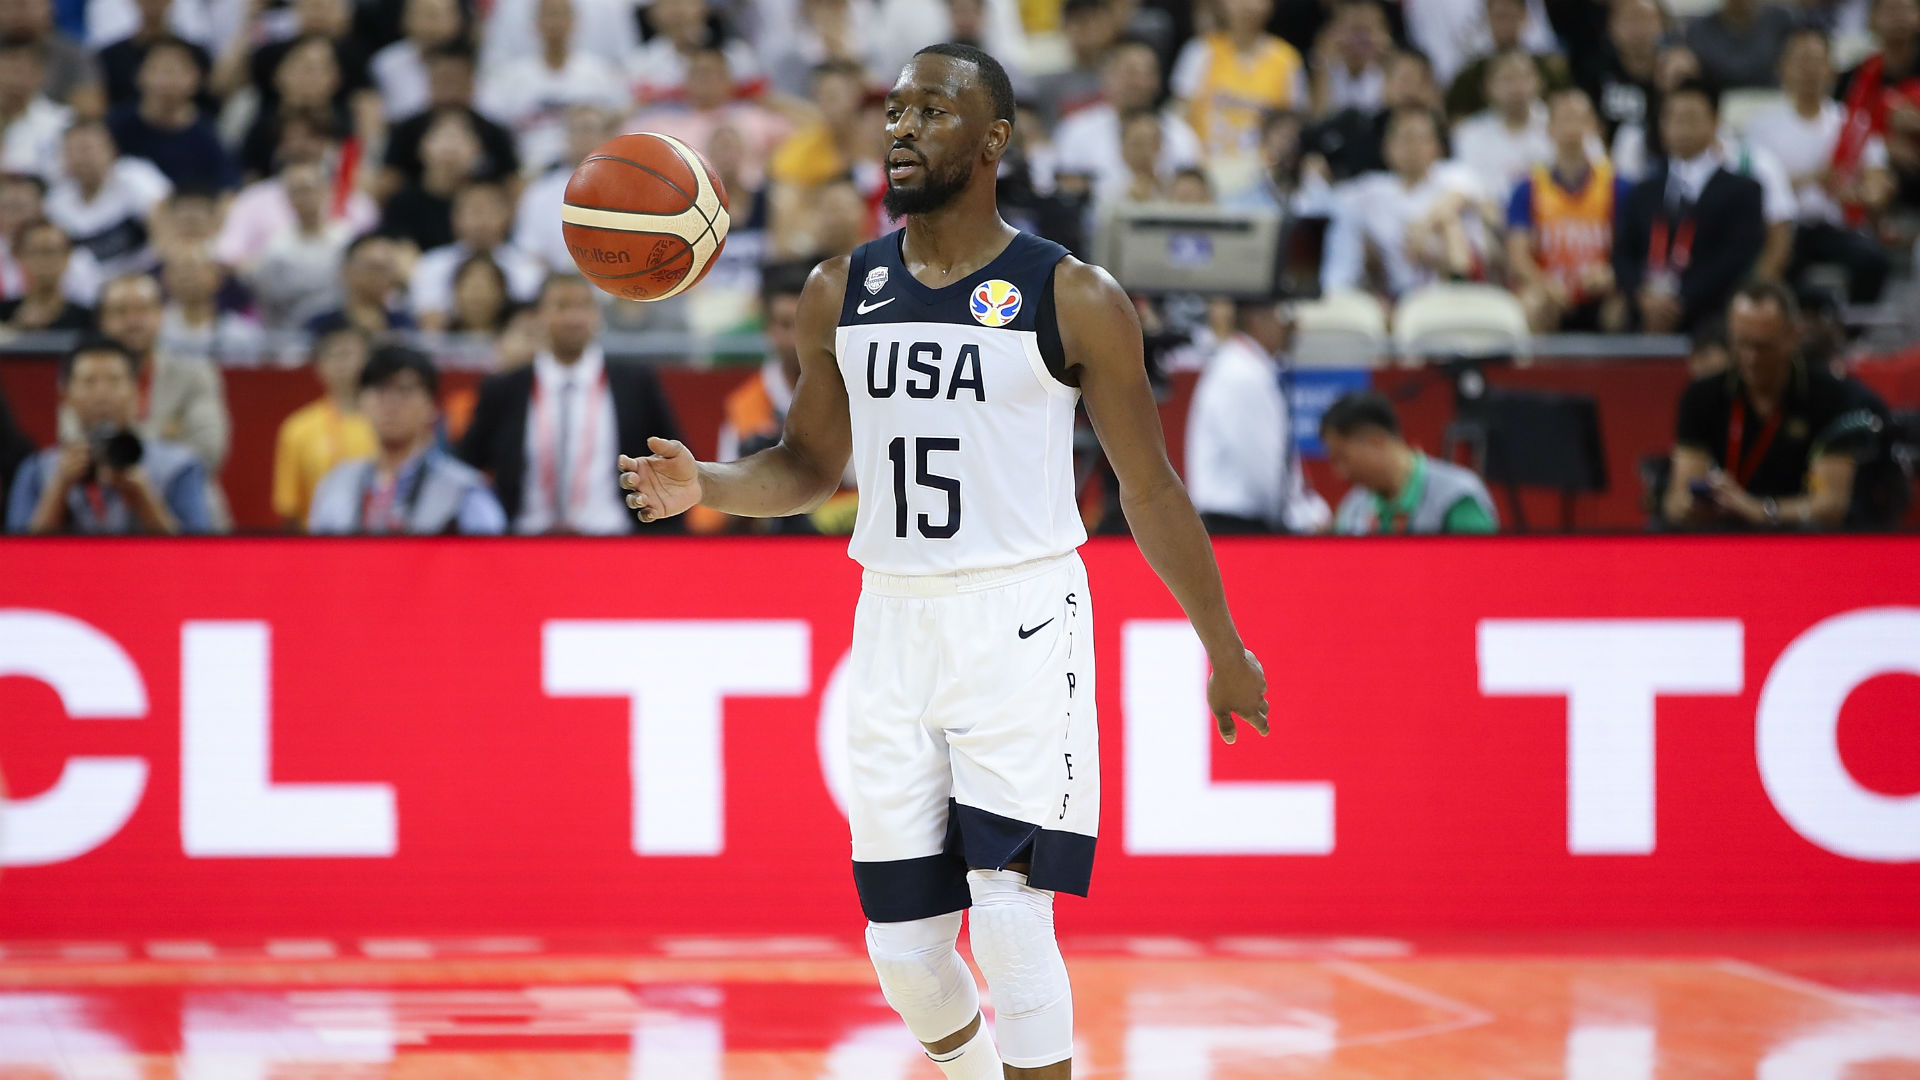 FIBA World Cup 2019: Full schedule, scores, TV channels, live stream for every USA basketball game